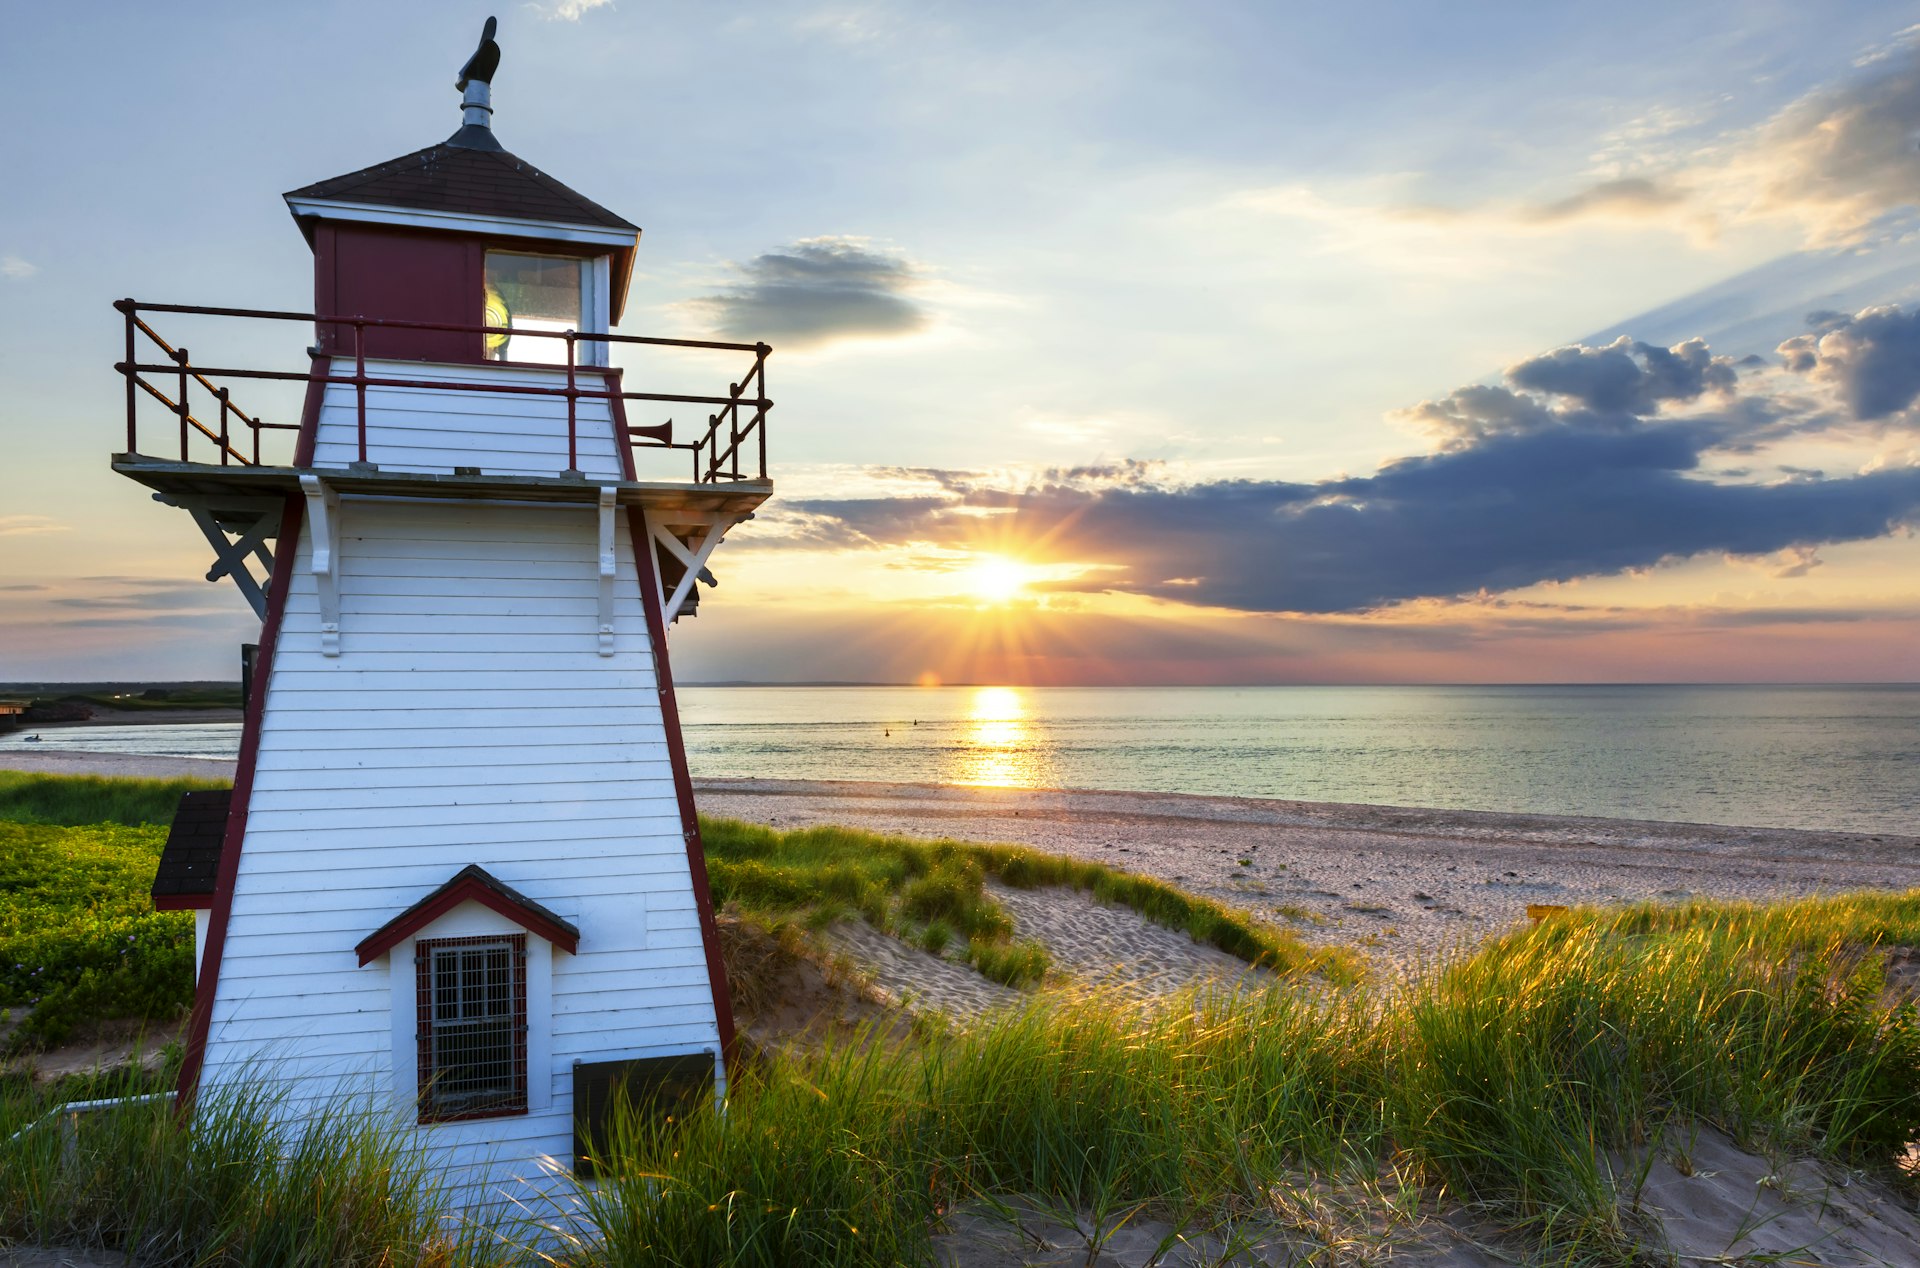 A wooden lighthouse painted bright white stands in the foreground, as the sun sets over a calm sea beyond.